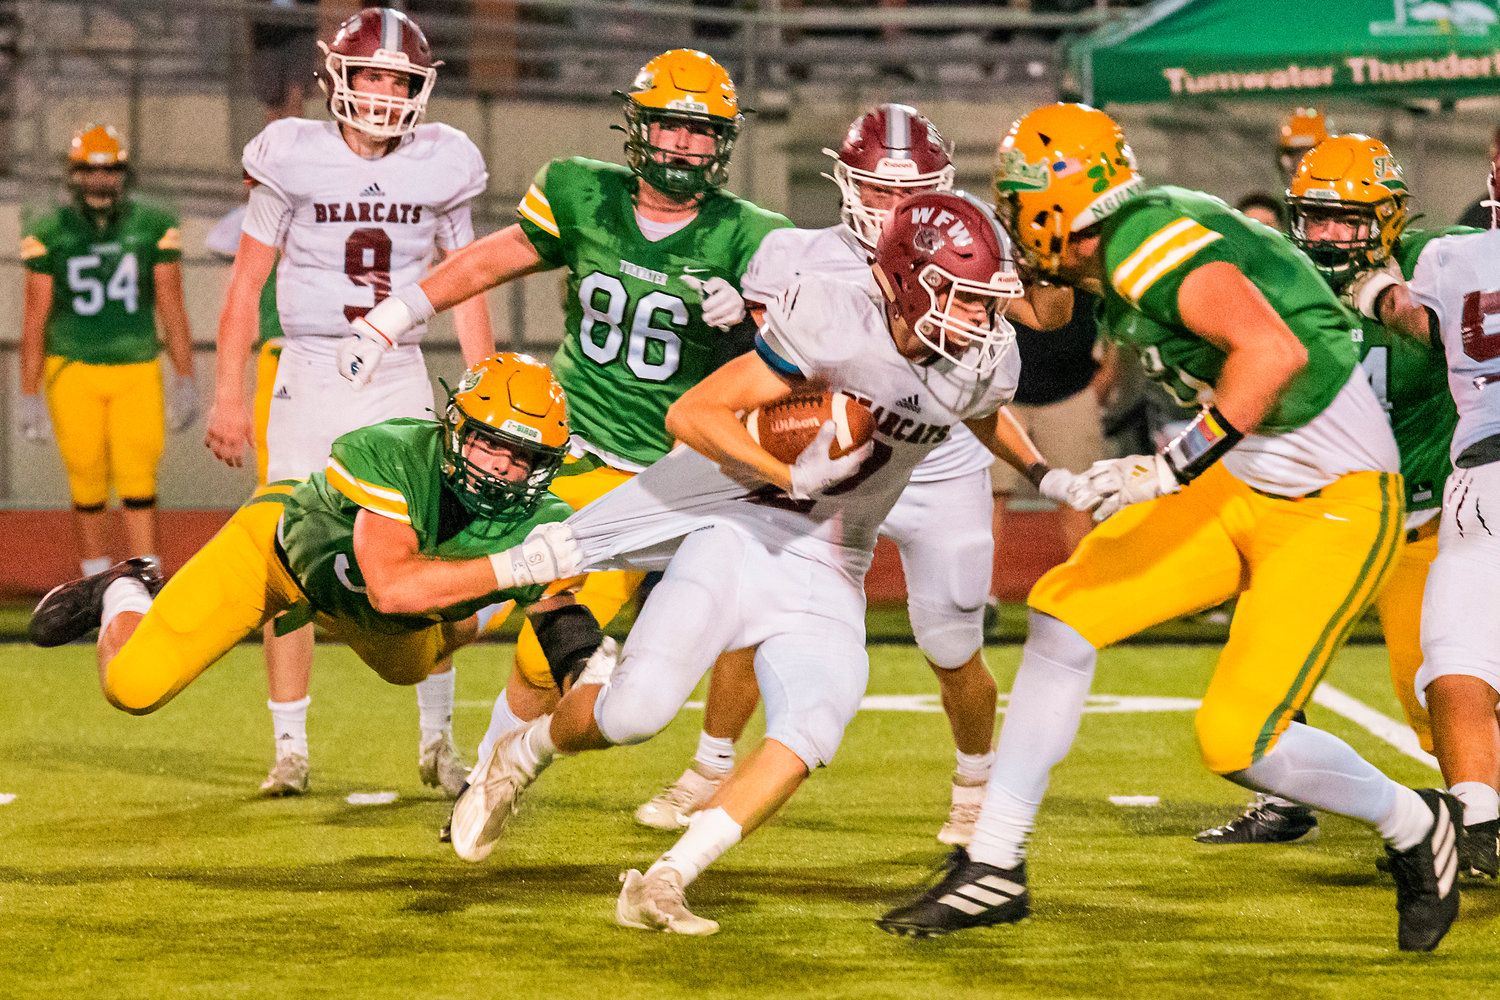 W.F. West’s Jacob Fuller (2) continues to pick up yardage as Tumwater’s Caleb Sadlemeyer (55) hangs off his jersey during a game Friday night.